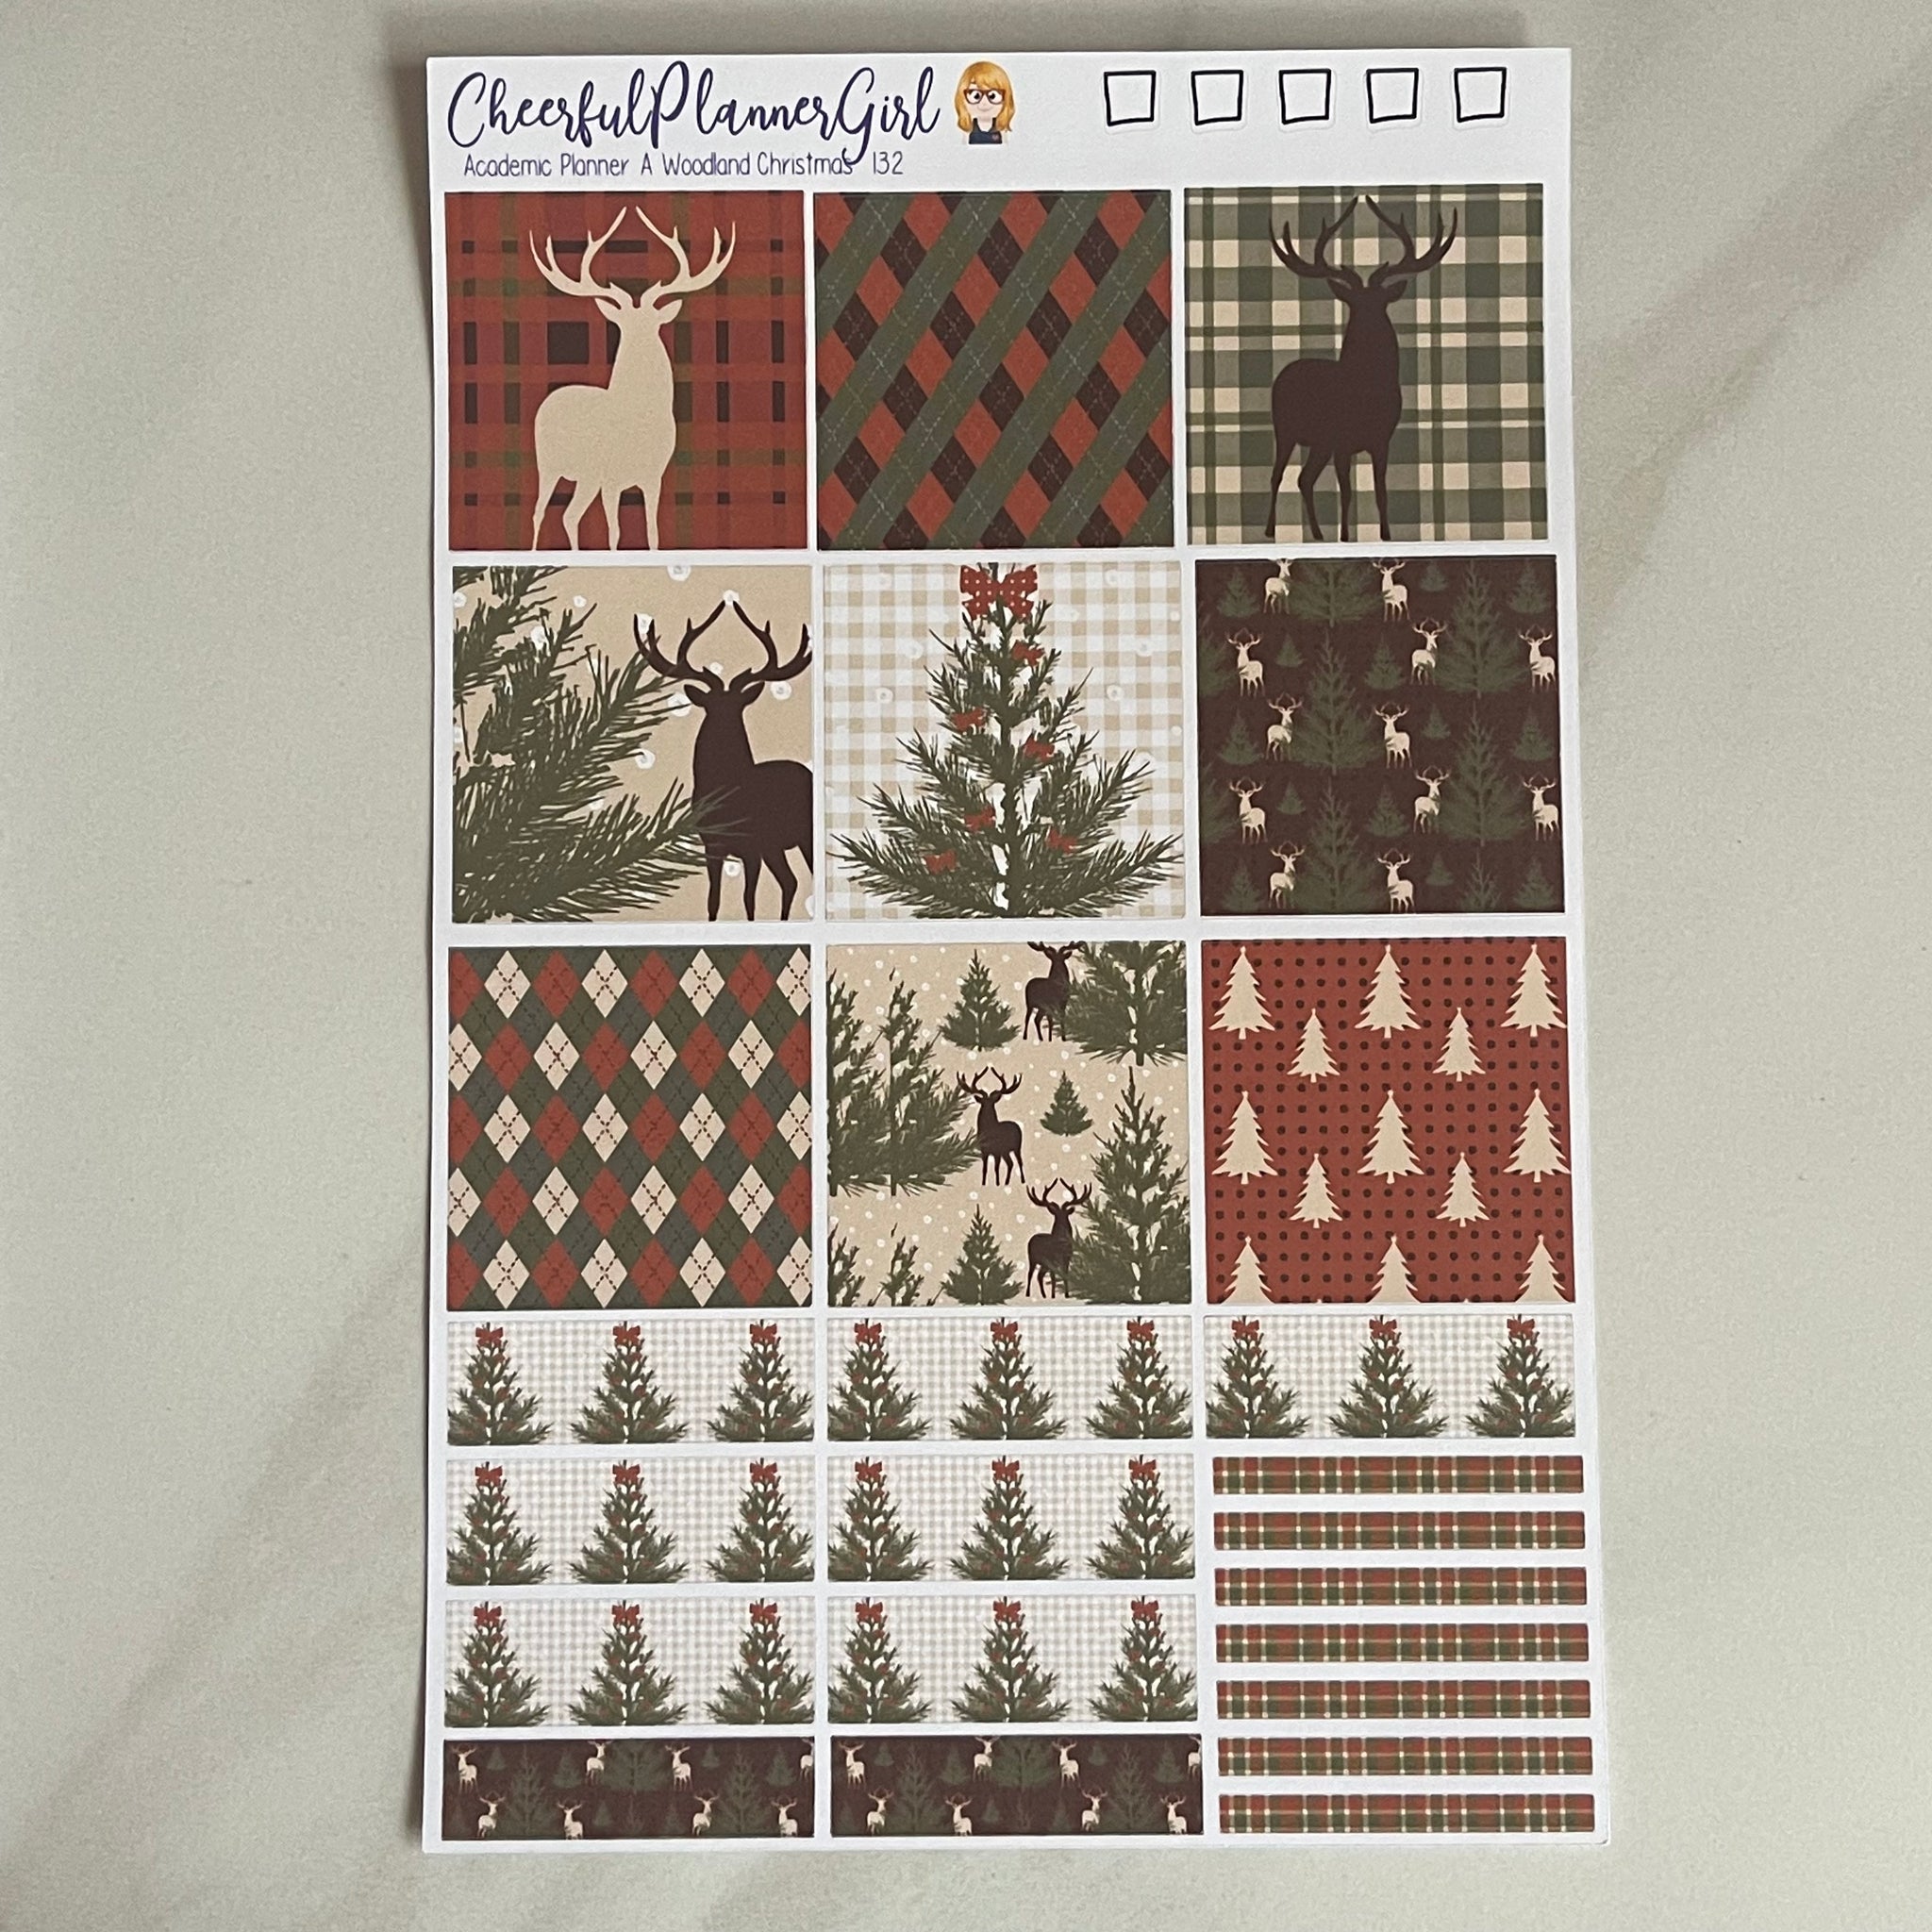 A Christmas Deer for Academic Planner Weekly Layout